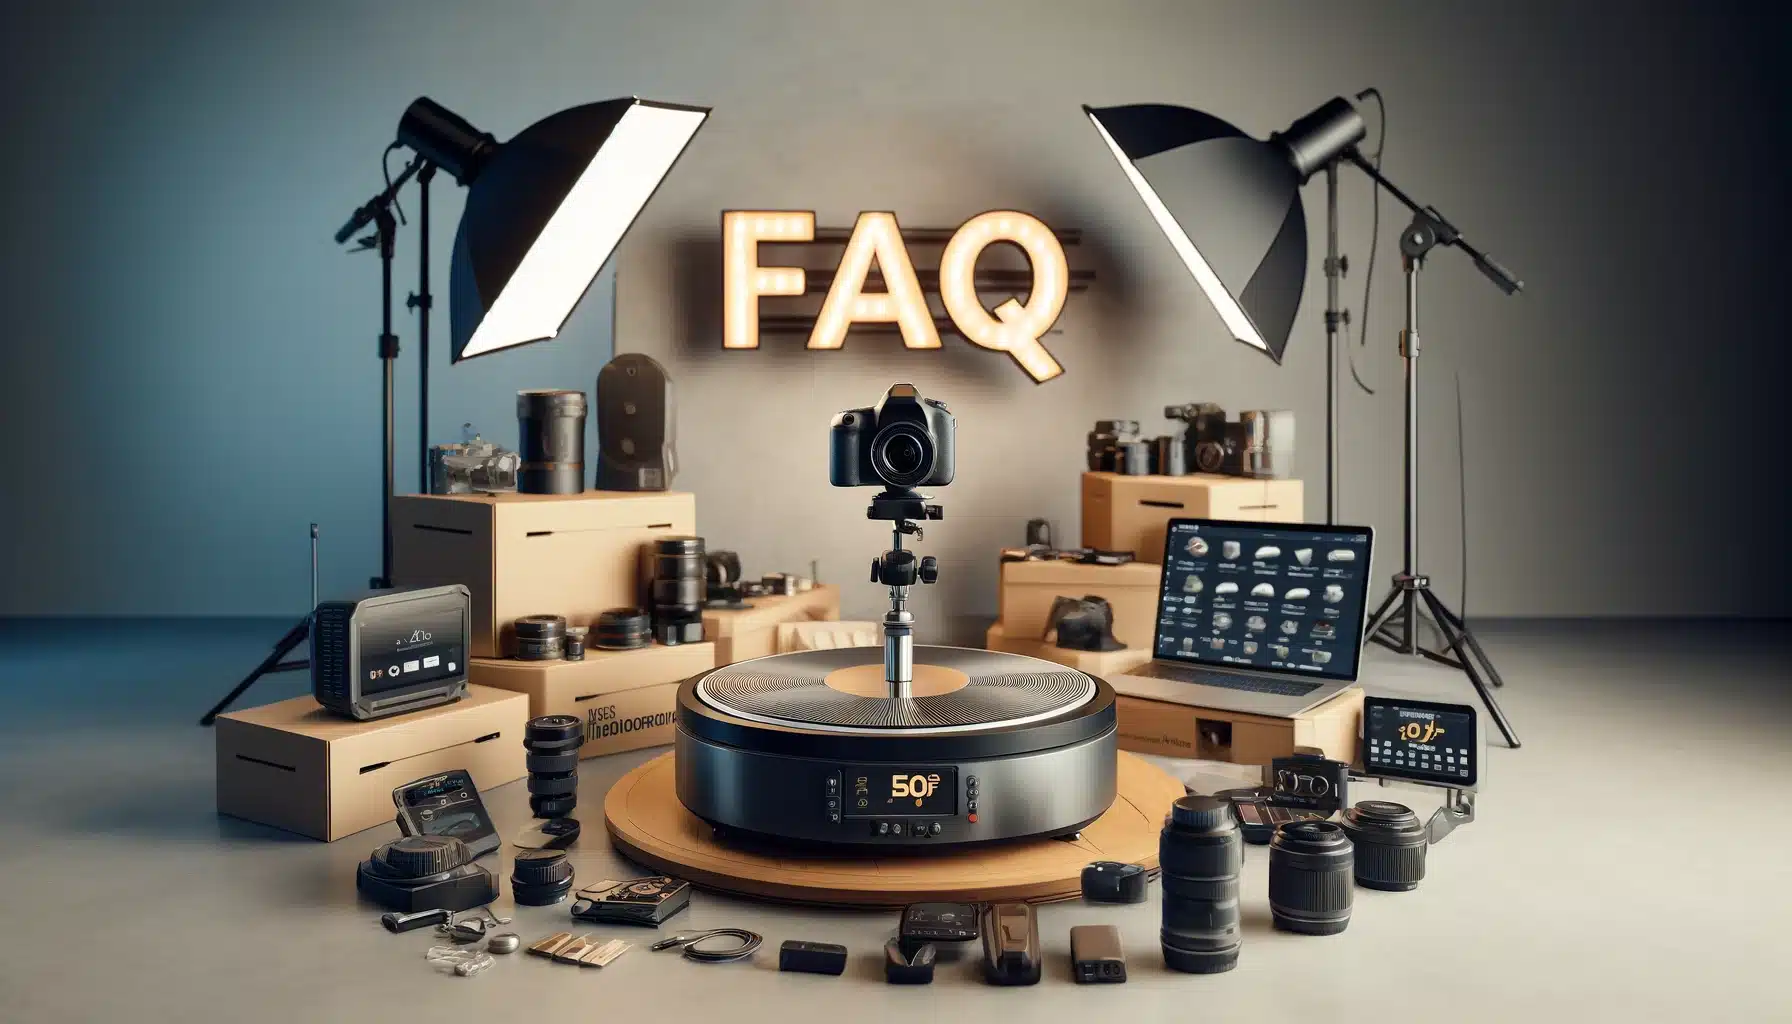 Professional Cycloidal Yield Microfilm studio setup with FAQ sign, featuring a motorized turntable, DSLR camera, softbox lights, and editing equipment